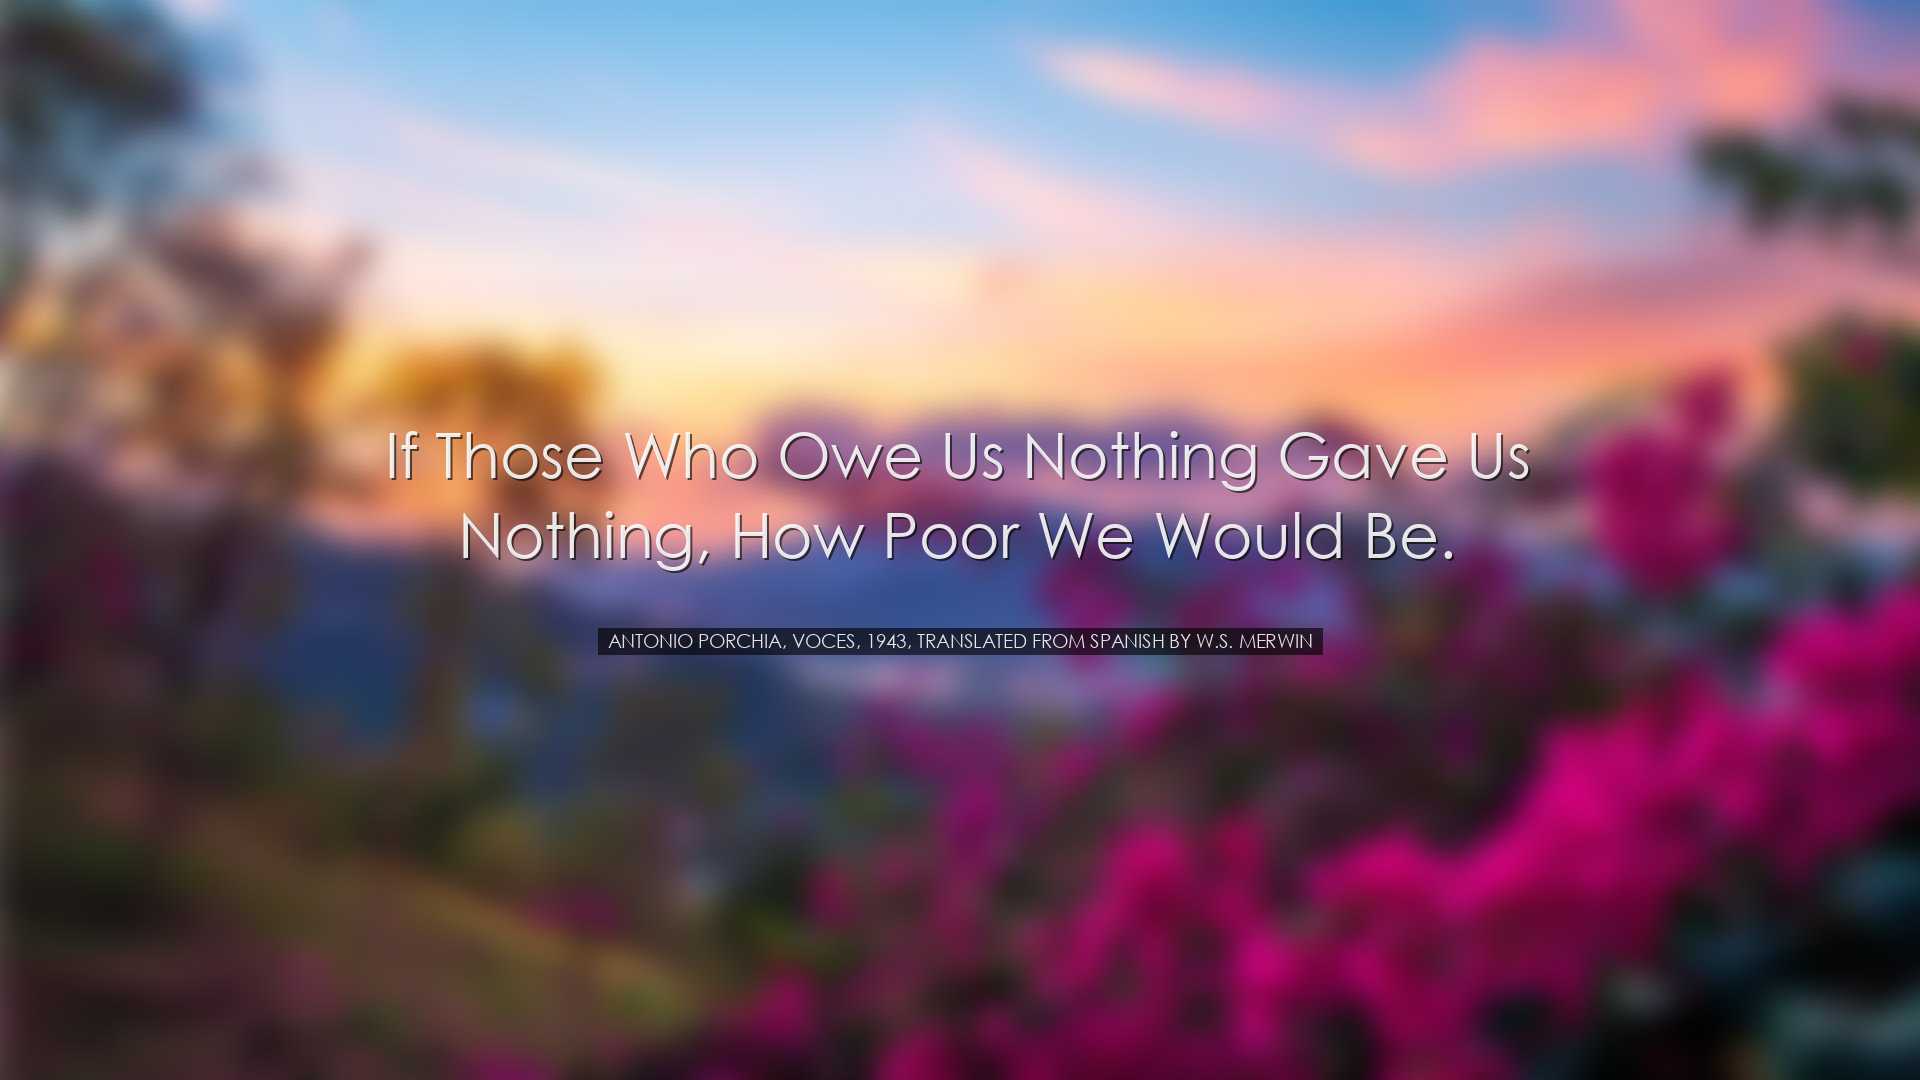 If those who owe us nothing gave us nothing, how poor we would be.